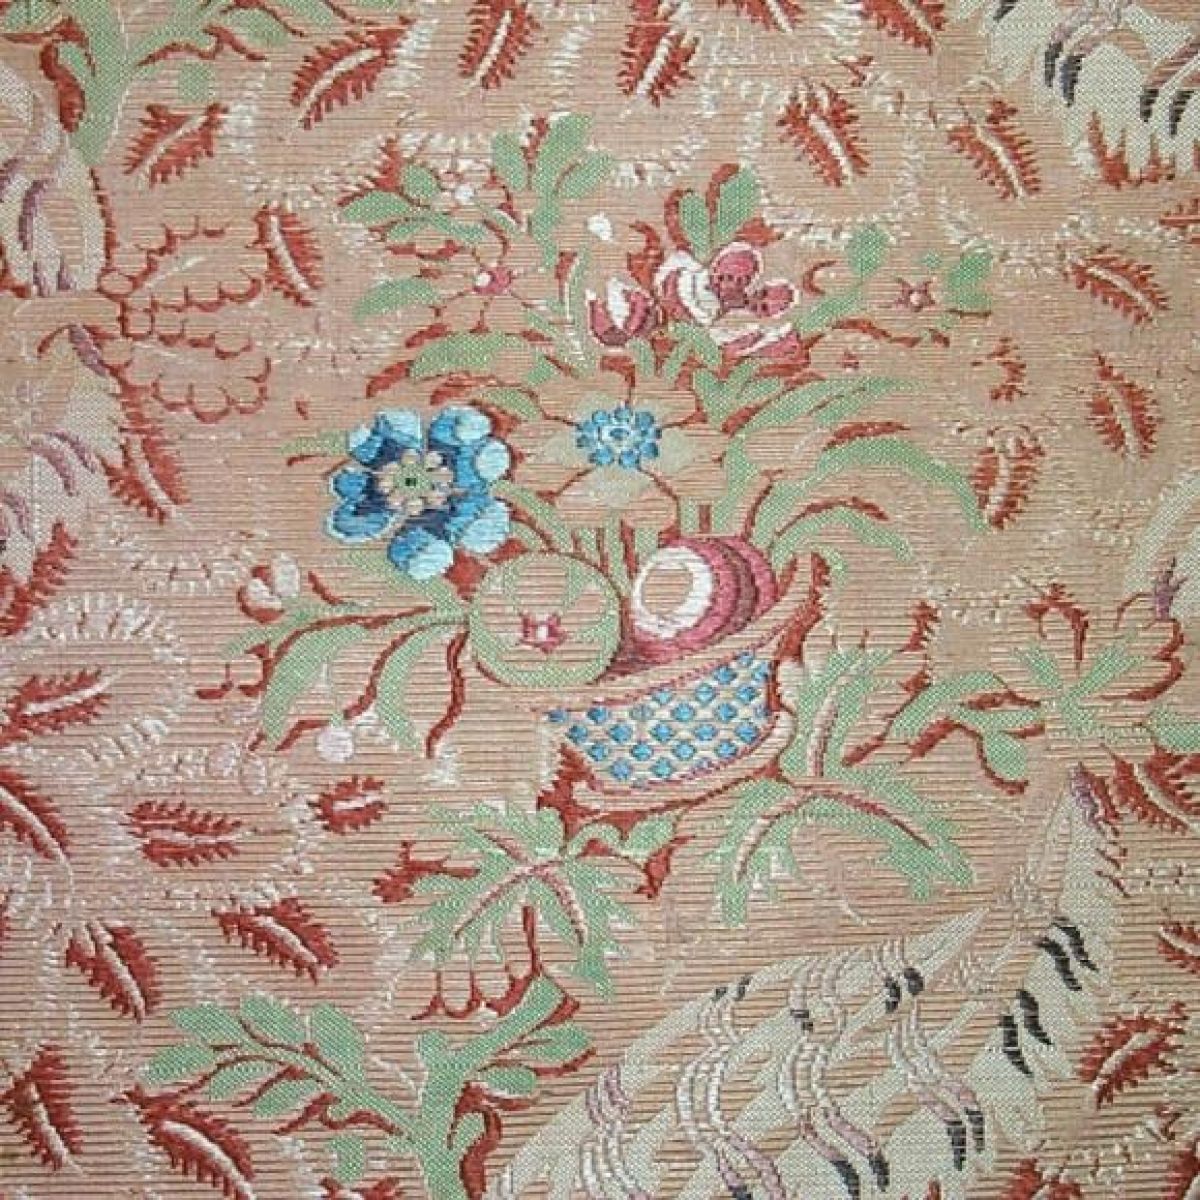 French, mid 18th century, silk brocade, pink ground with baskets ...